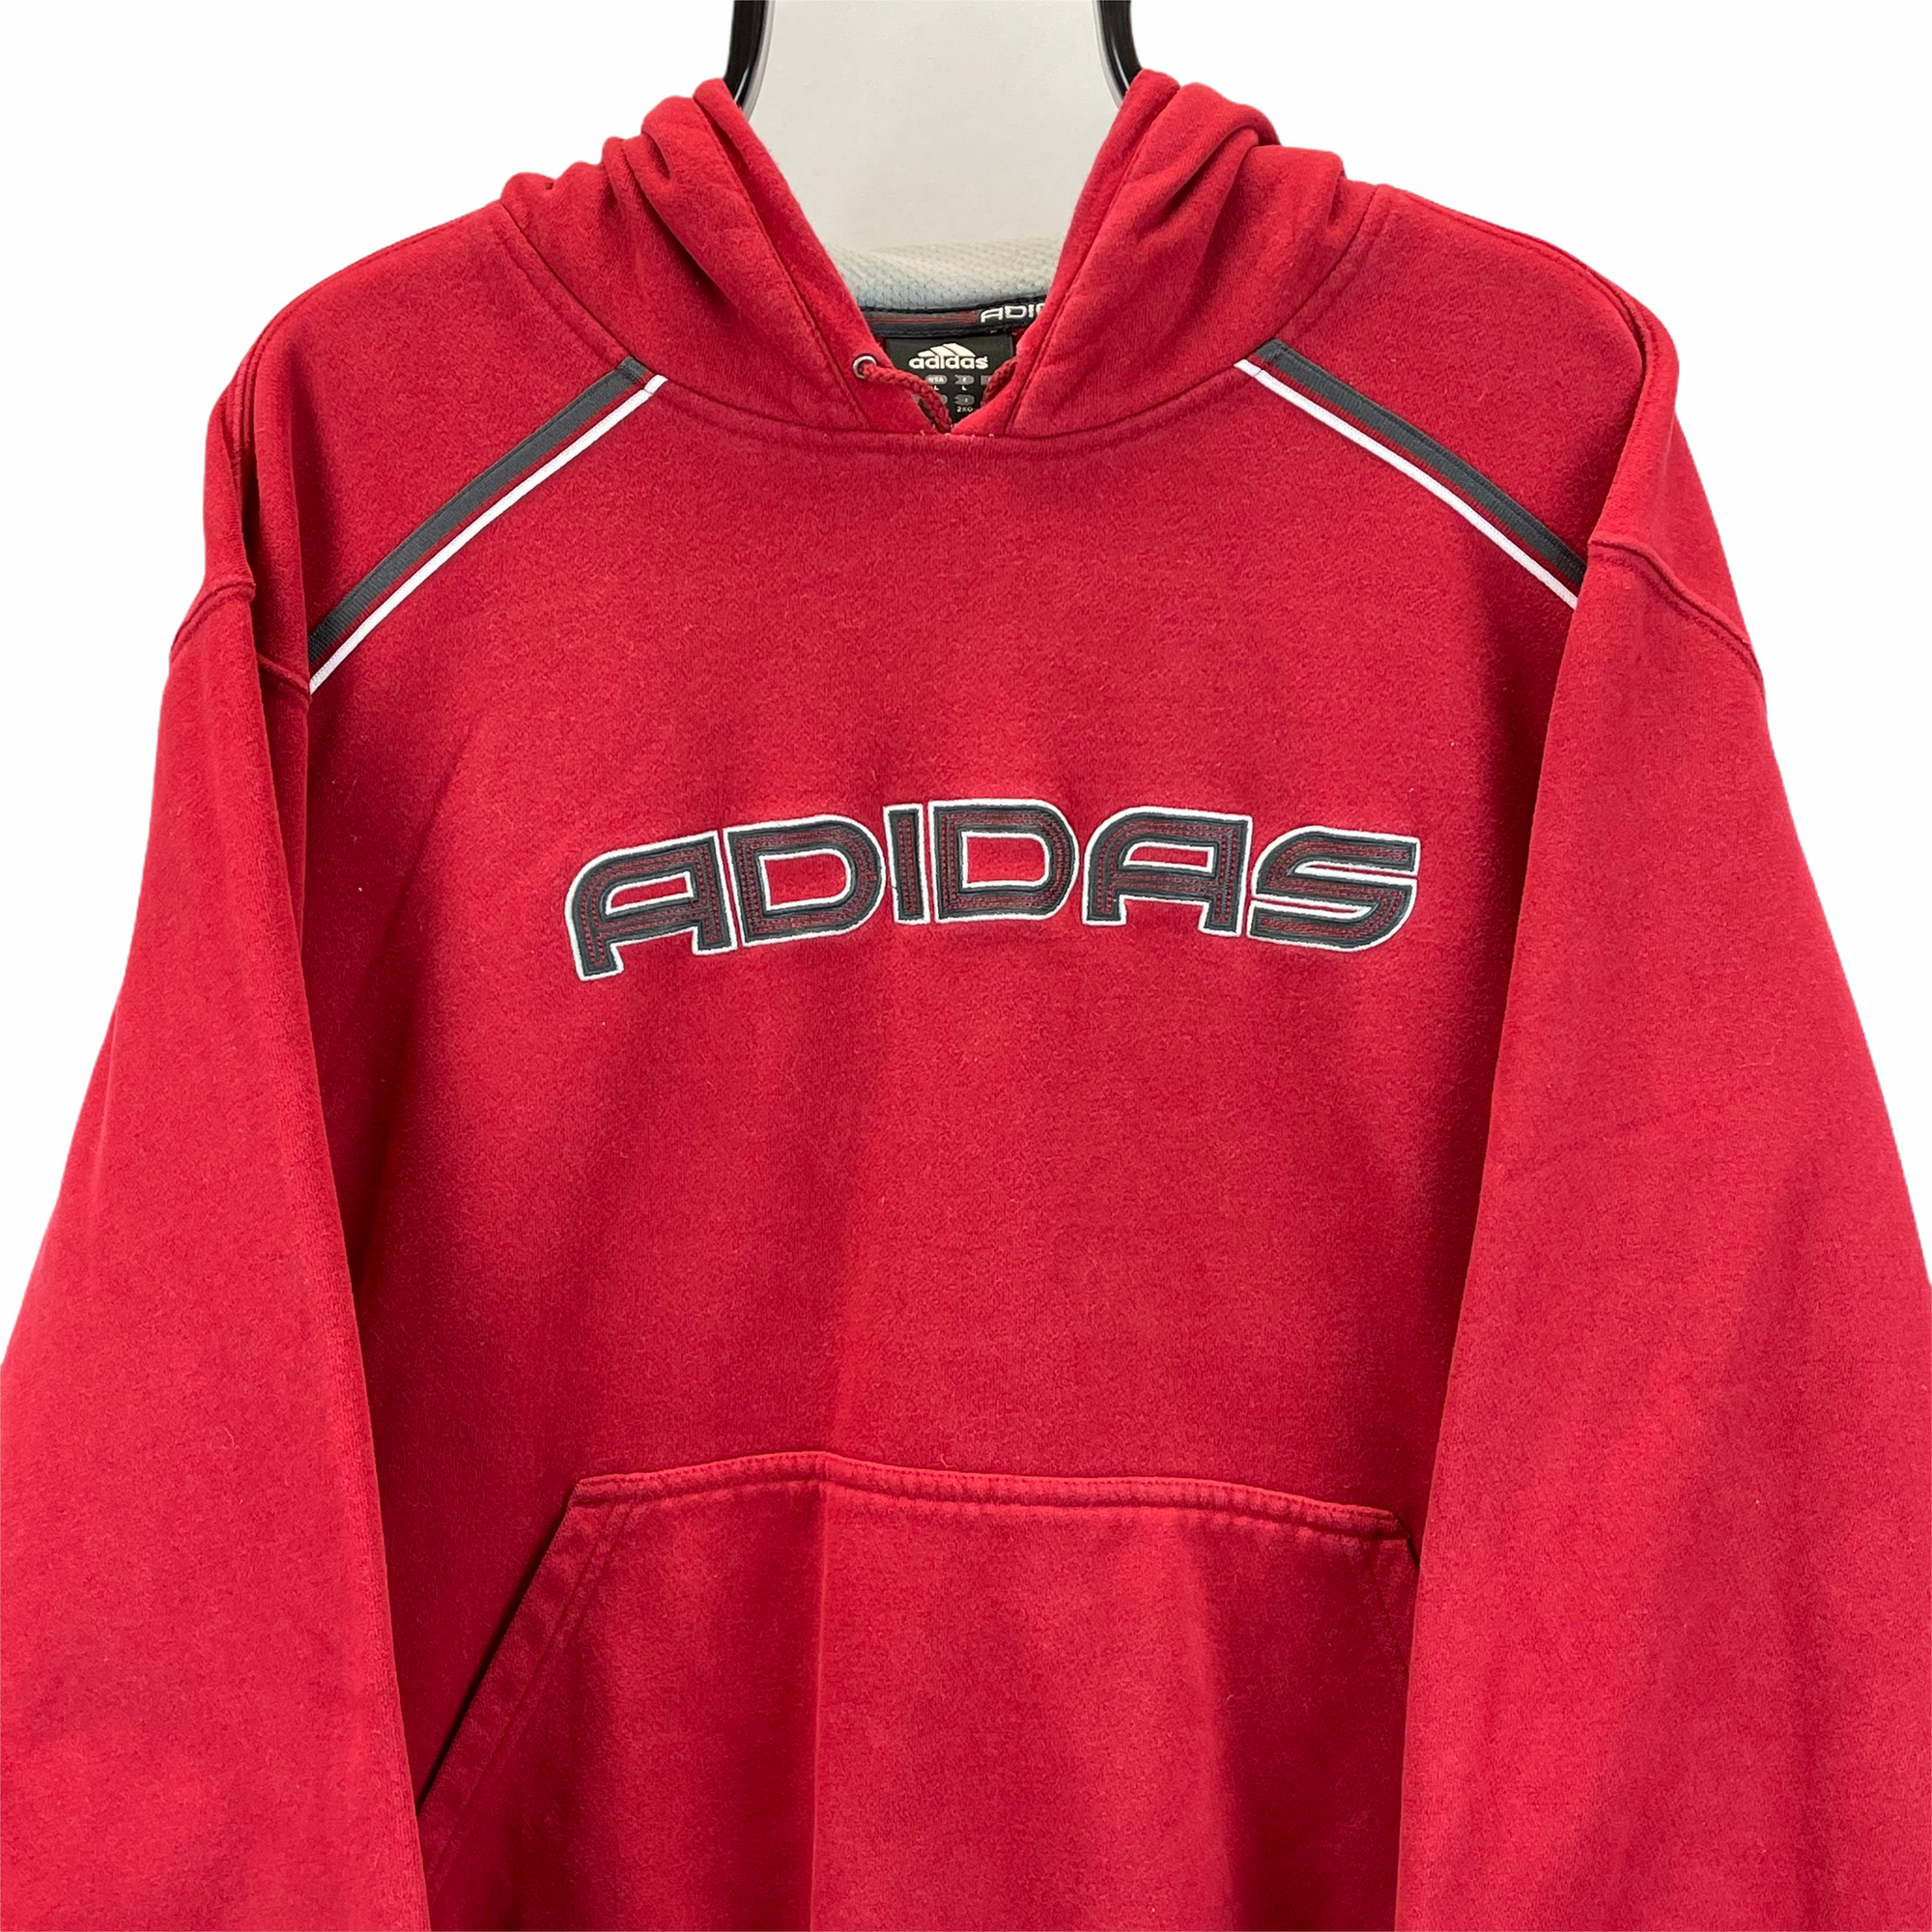 ADIDAS SPELLOUT HOODIE IN RED - MEN'S LARGE/WOMEN'S XL